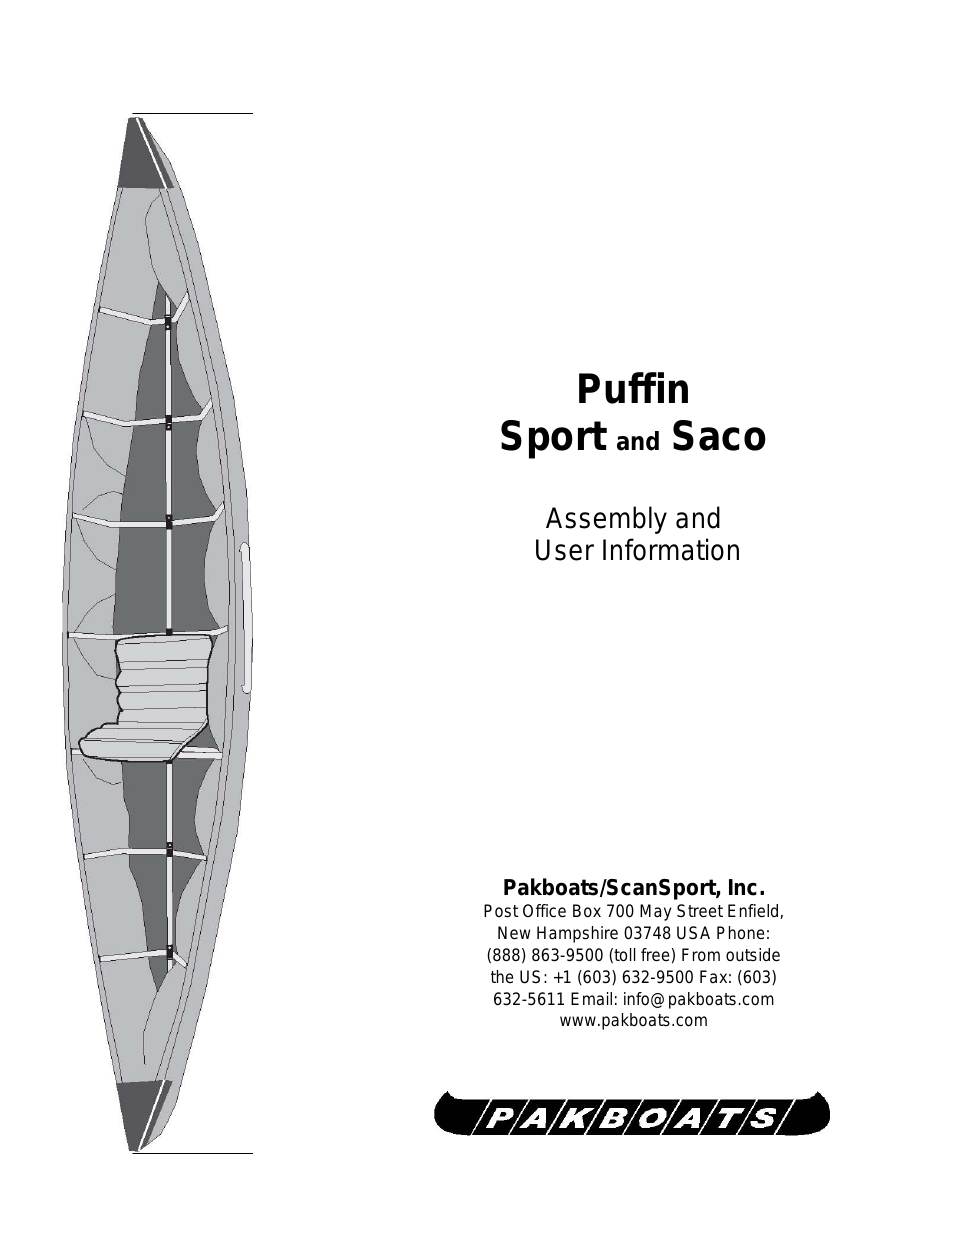 Puffin Sport and Saco